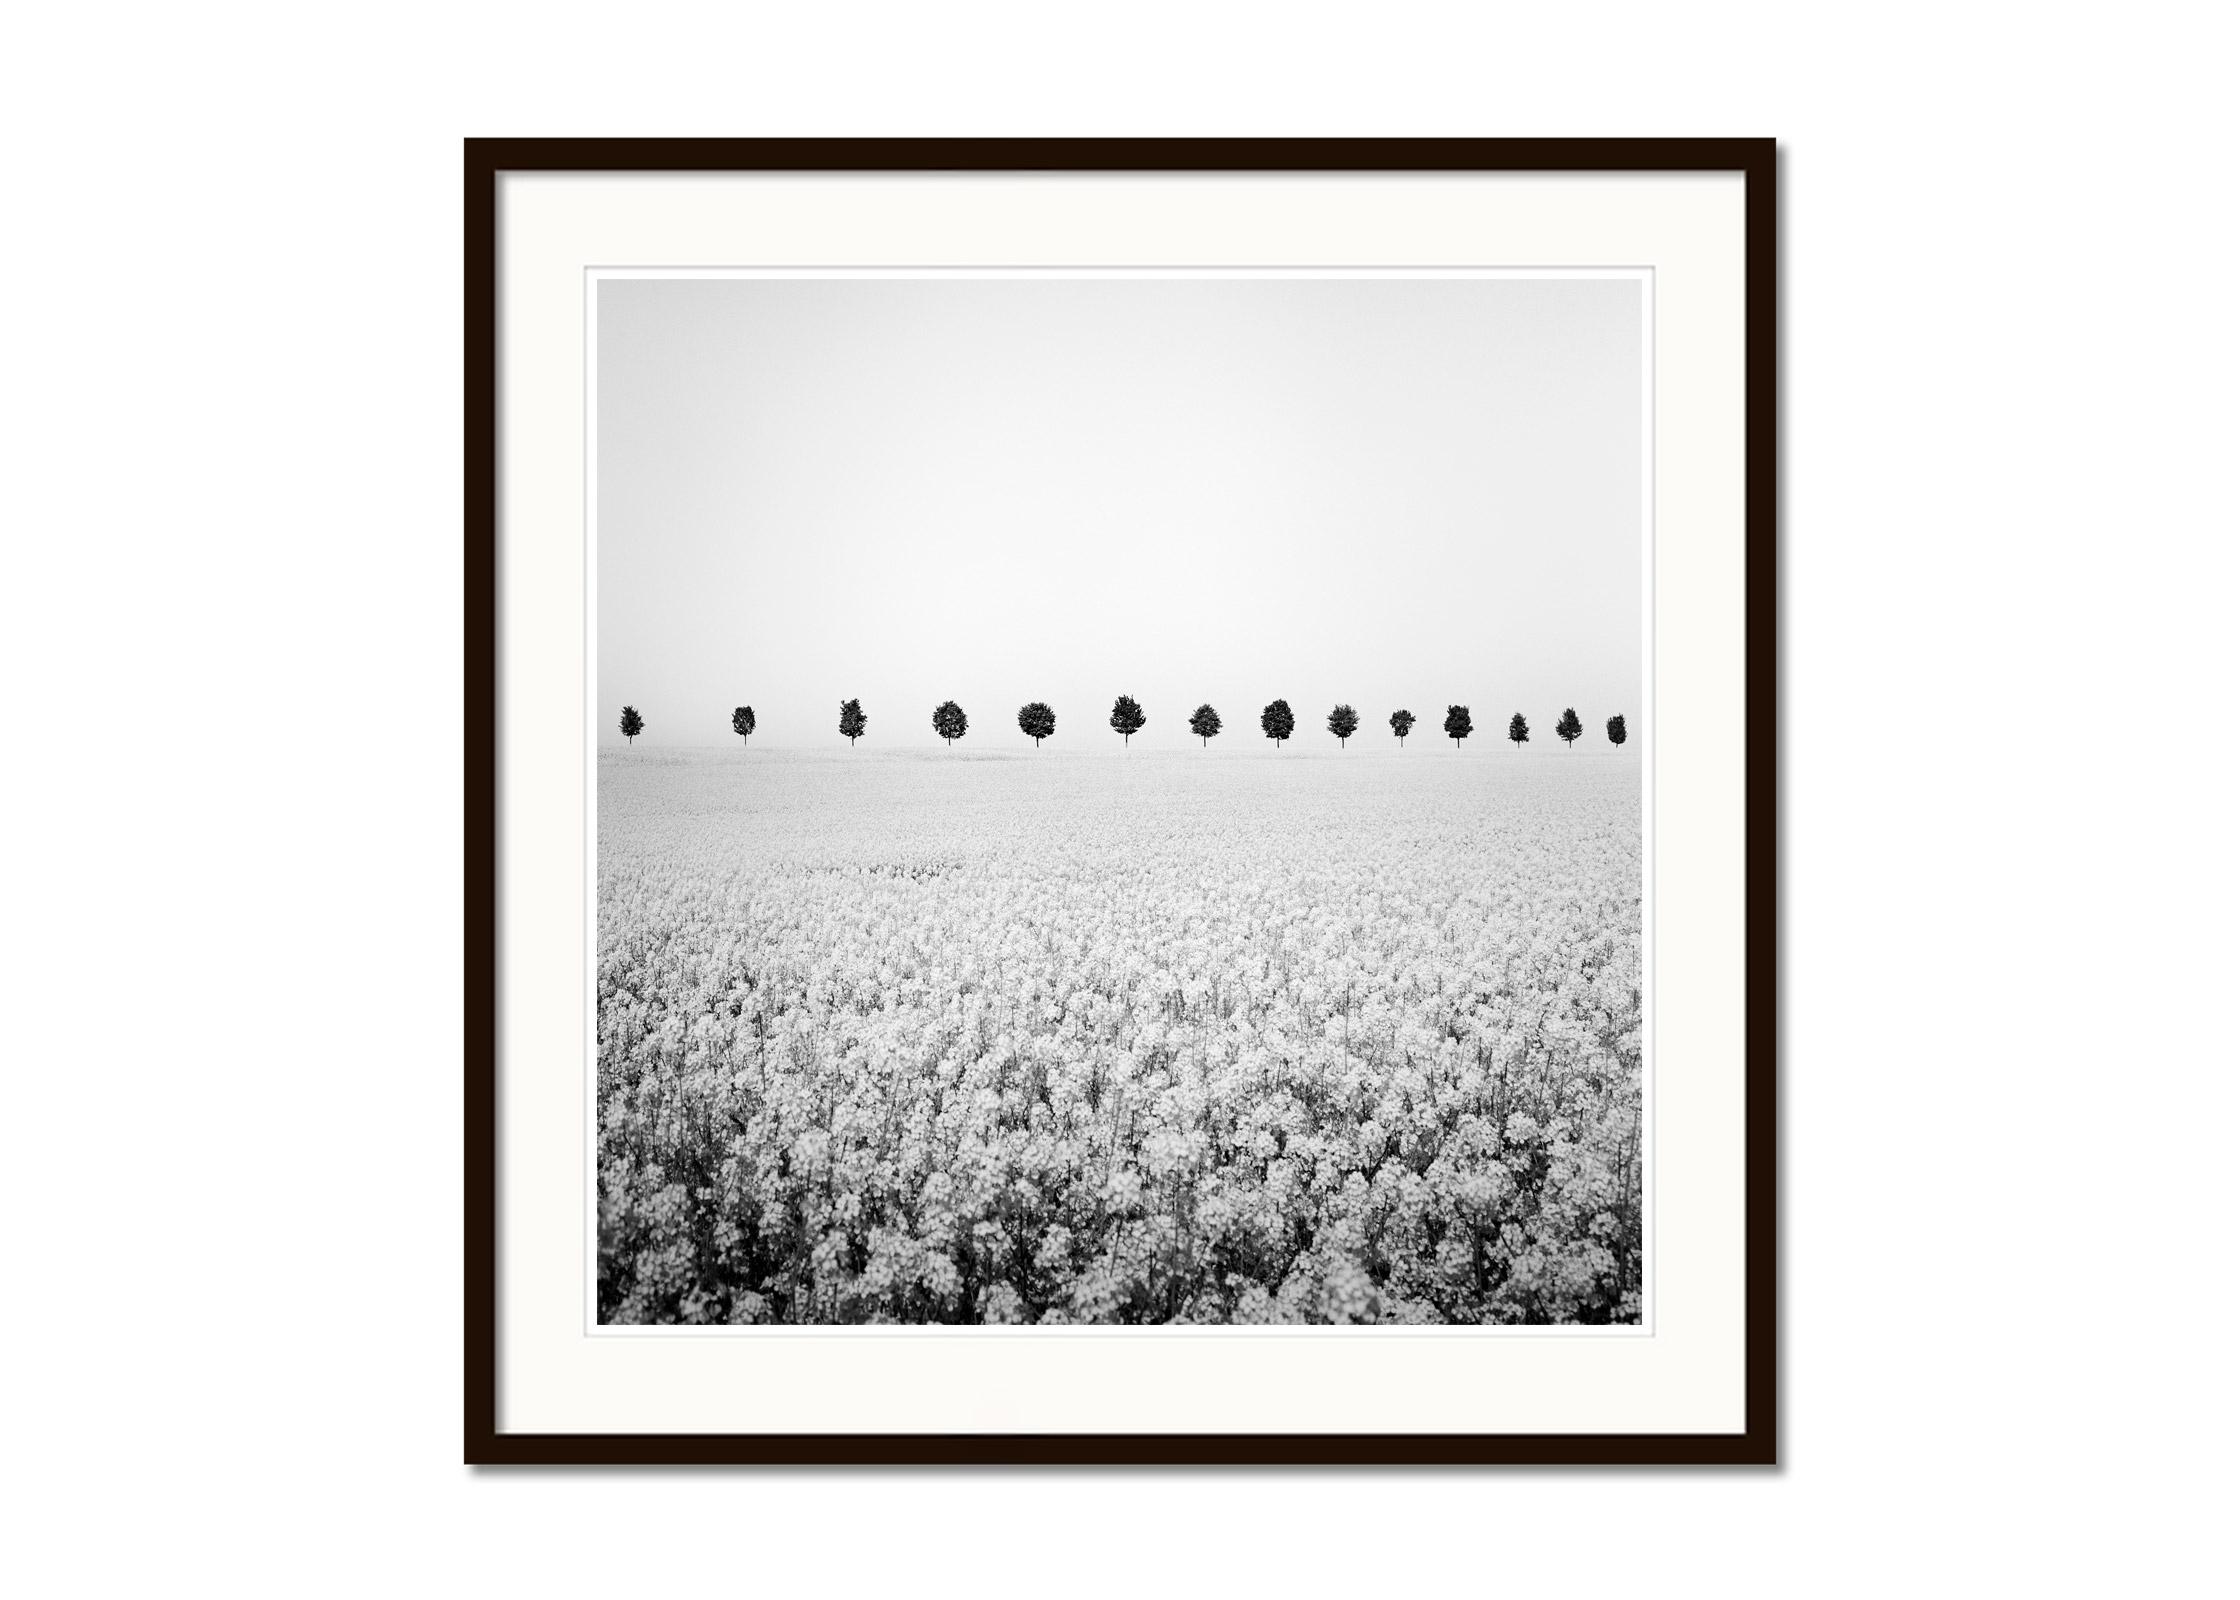 Black and white fine art landscape photography. Row of trees in the rapeseed field, France. Archival pigment ink print, edition of 9. Signed, titled, dated and numbered by artist. Certificate of authenticity included. Printed with 4cm white